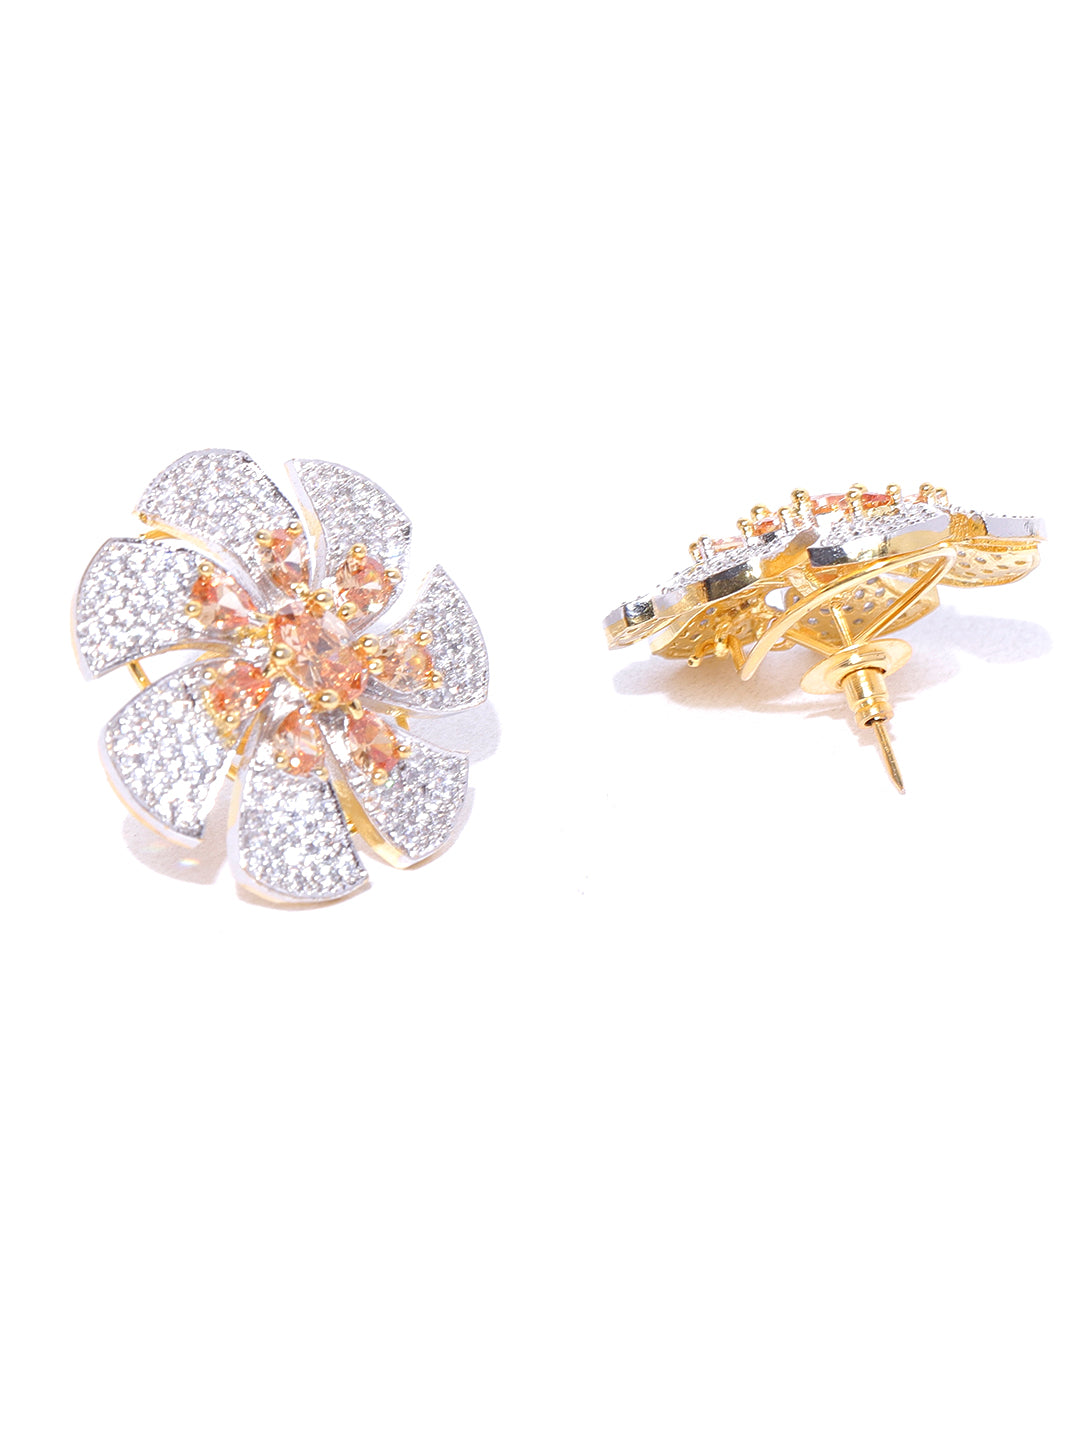 Sparkling Floral Shaped Two Tone American Diamond Stud Earring For Women And Girls